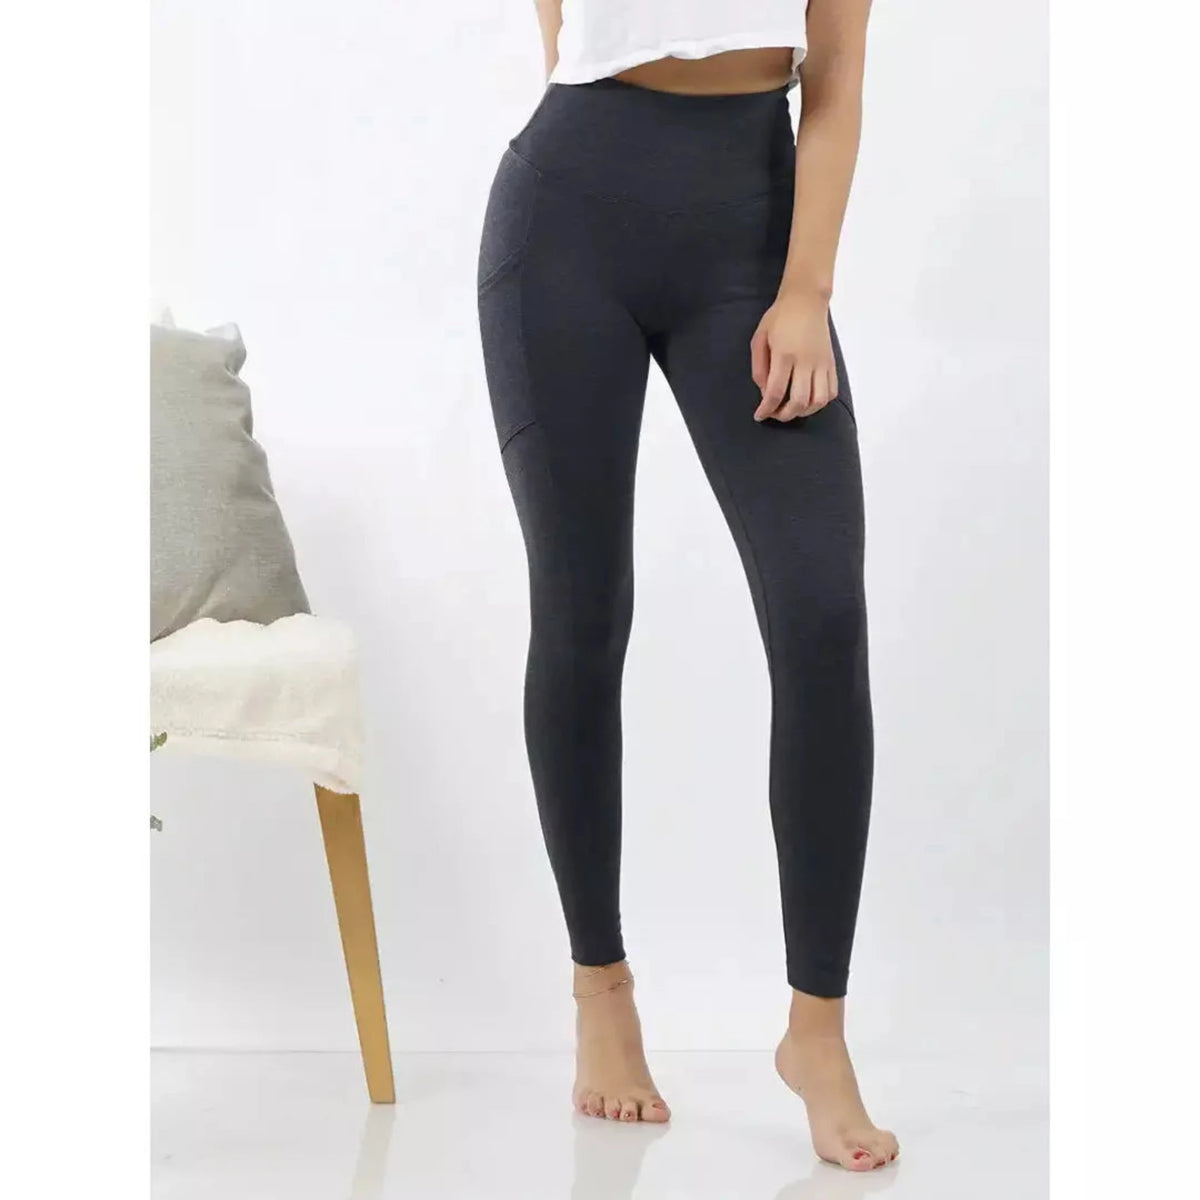 Leggings with Pockets - SLATE Boutique & Gifts